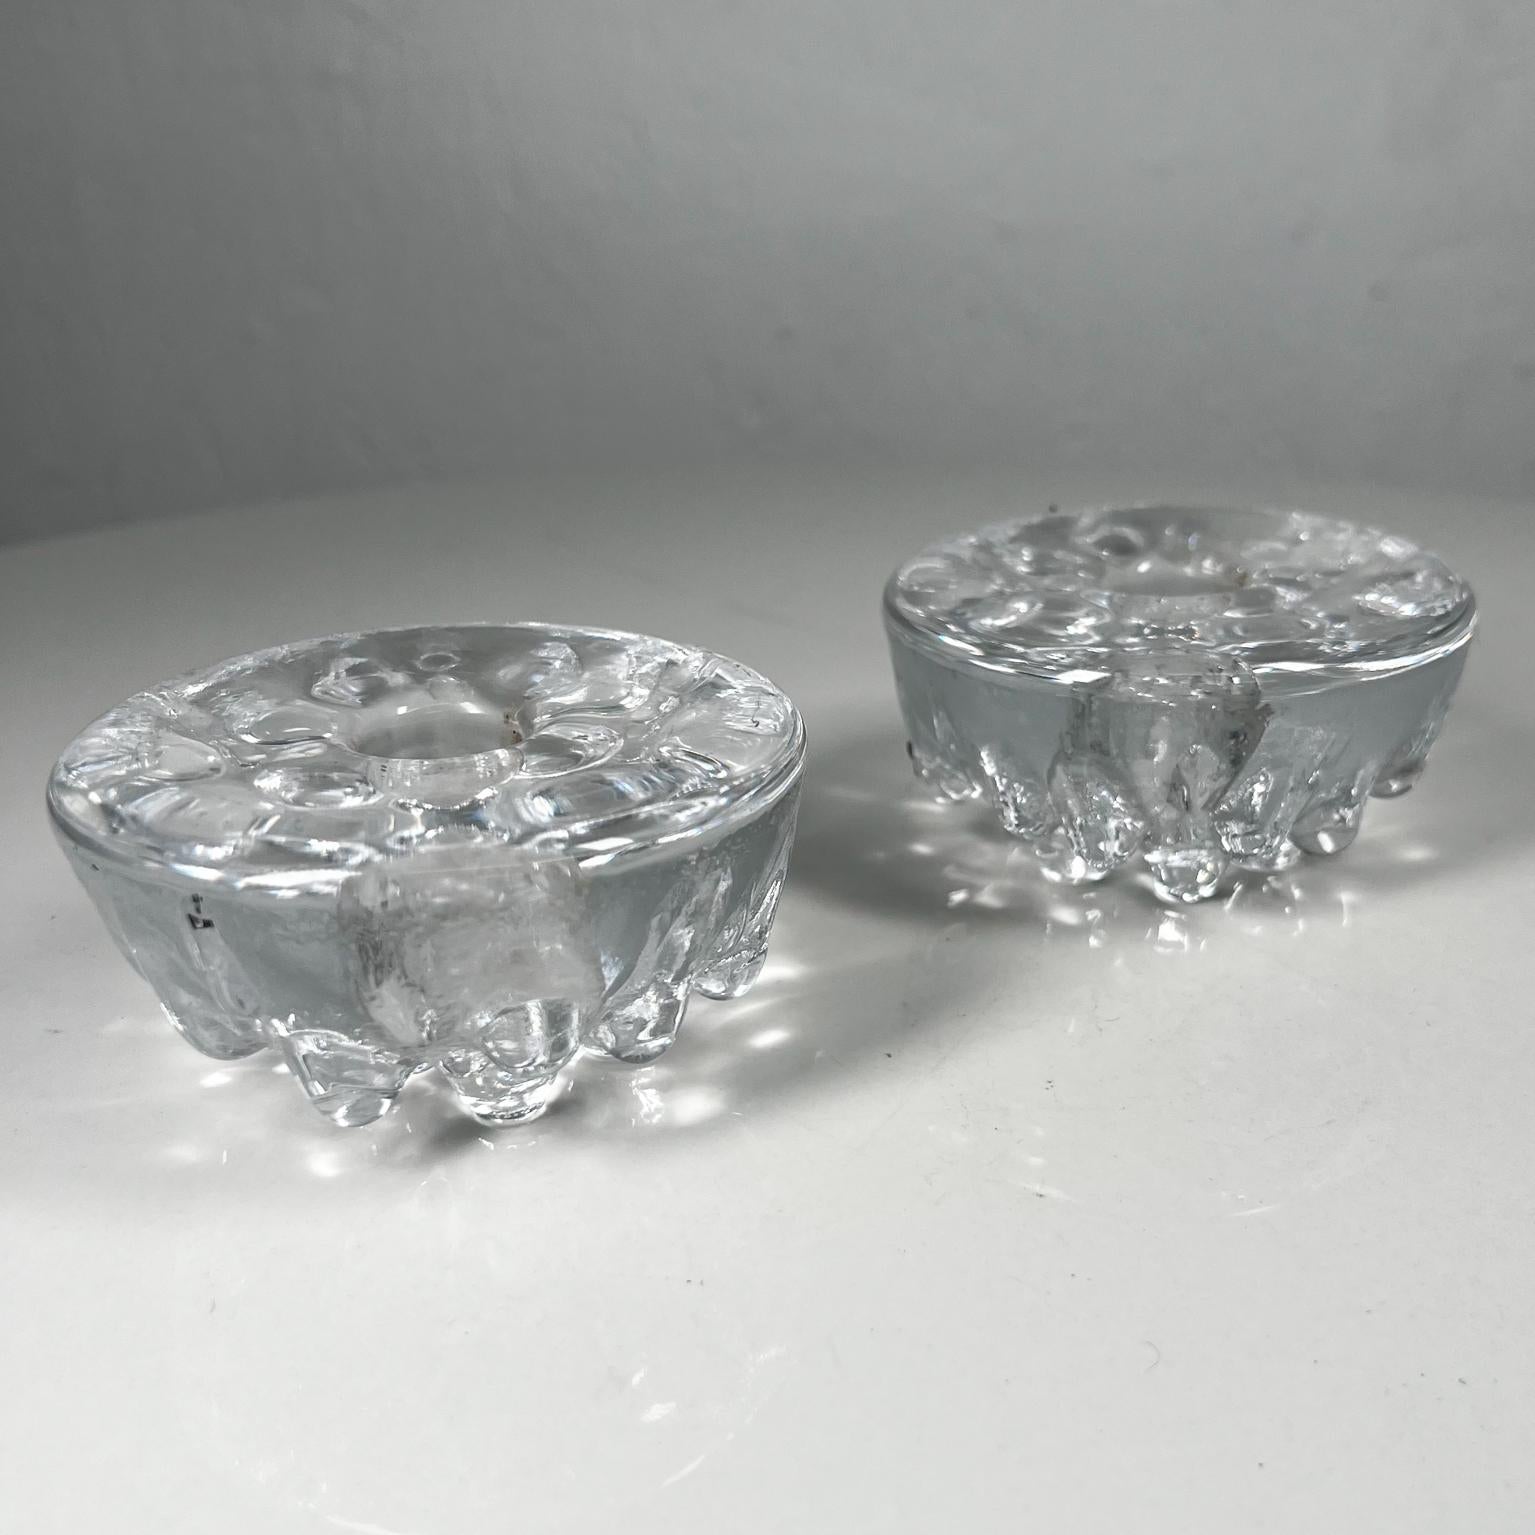 1970s Iittala Tapio Wirkkala Finland clear Art glass taper candleholders pair
3.5 diameter x 1.75 tall
Preowned vintage condition.
Refer to images listed please.